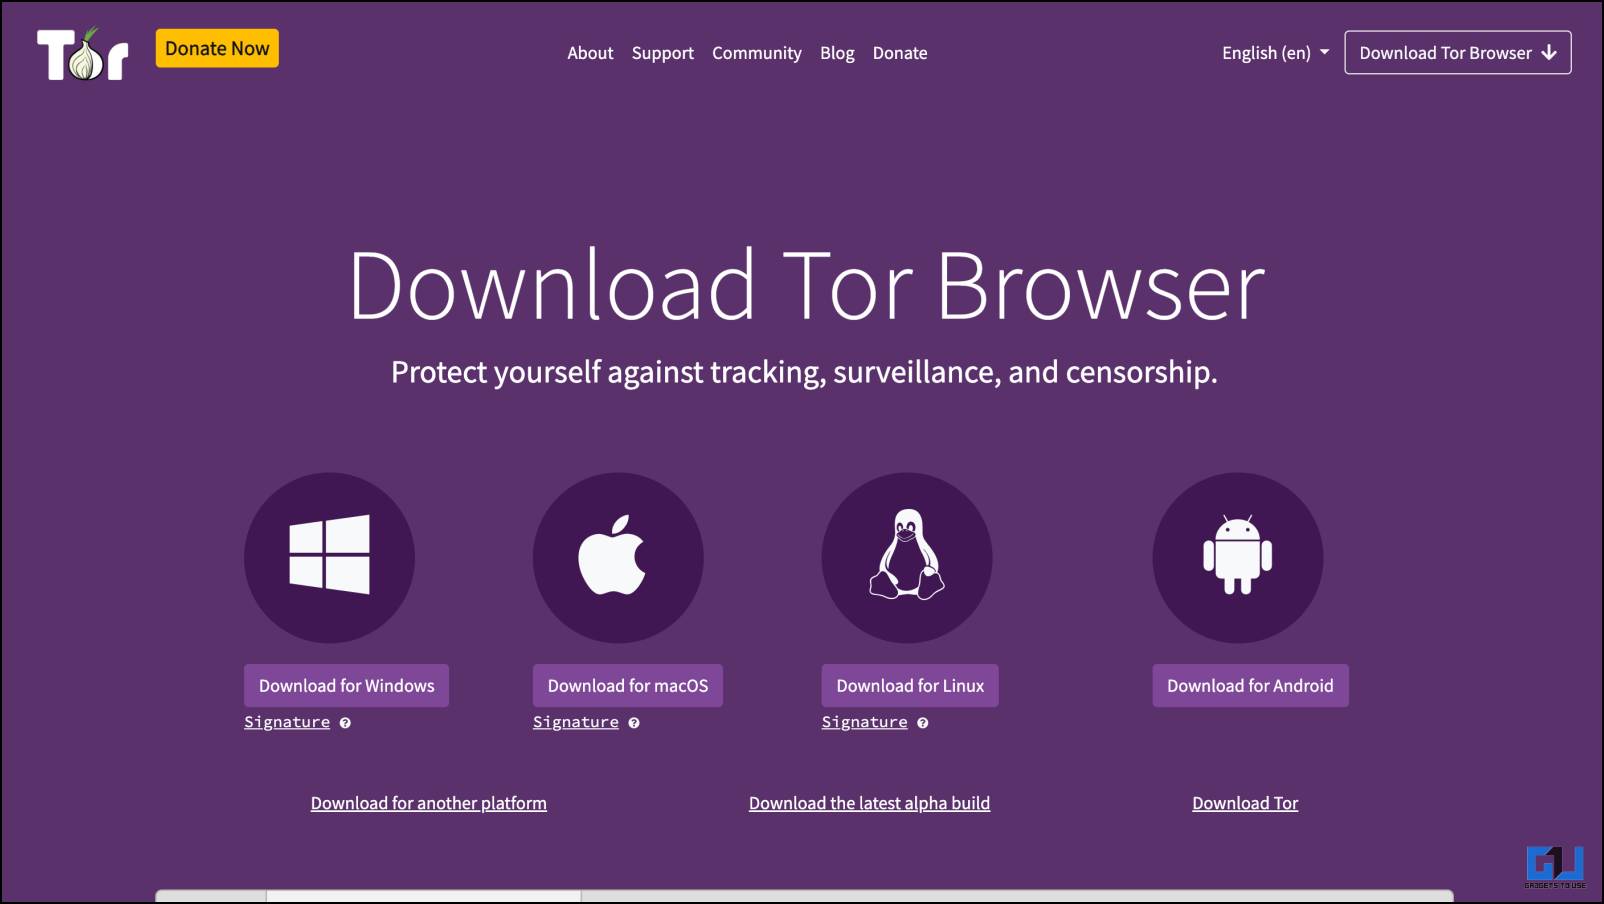 Official download page of Tor Browser